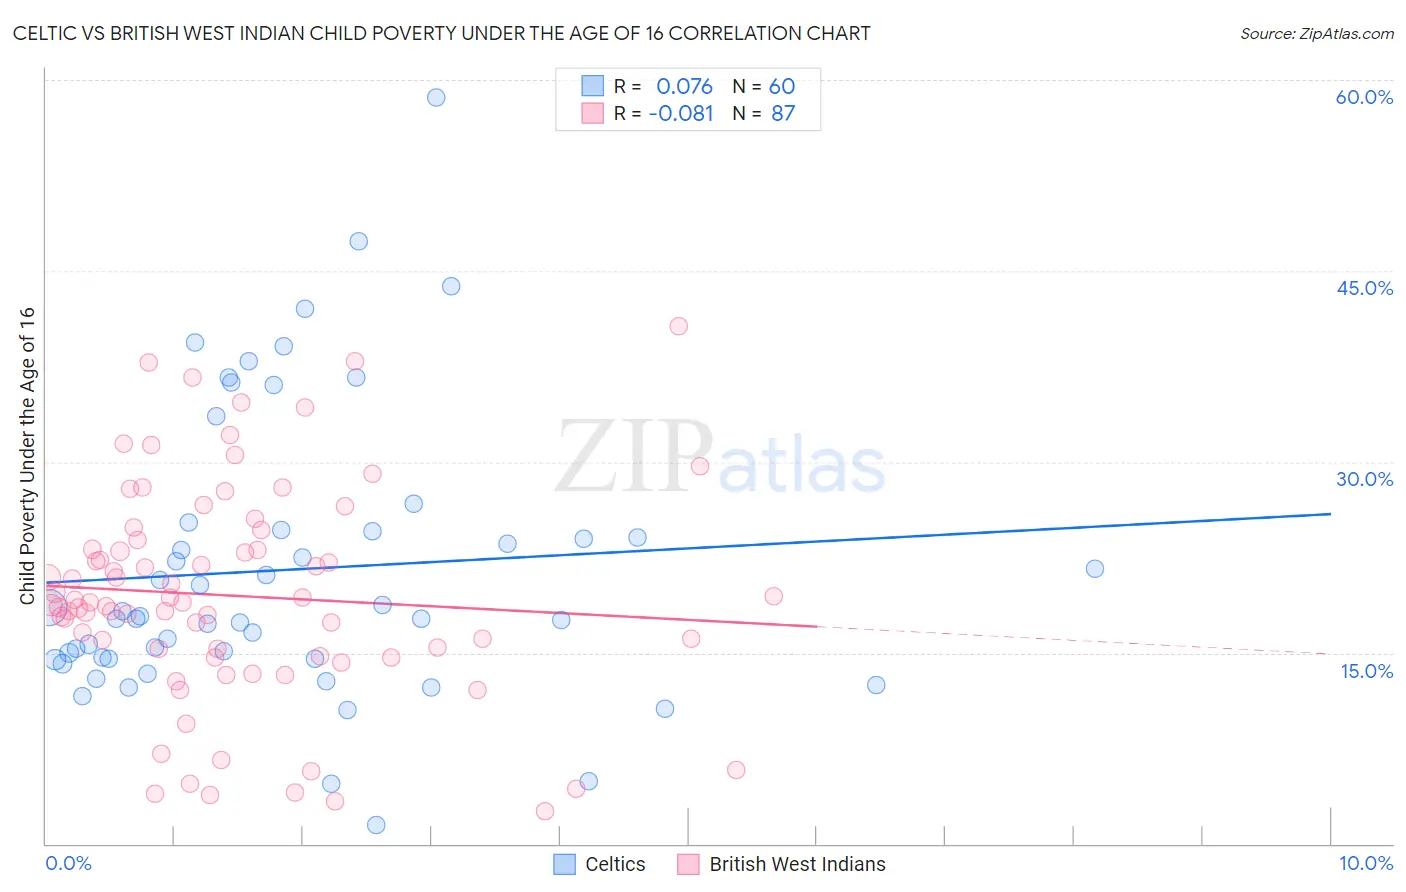 Celtic vs British West Indian Child Poverty Under the Age of 16